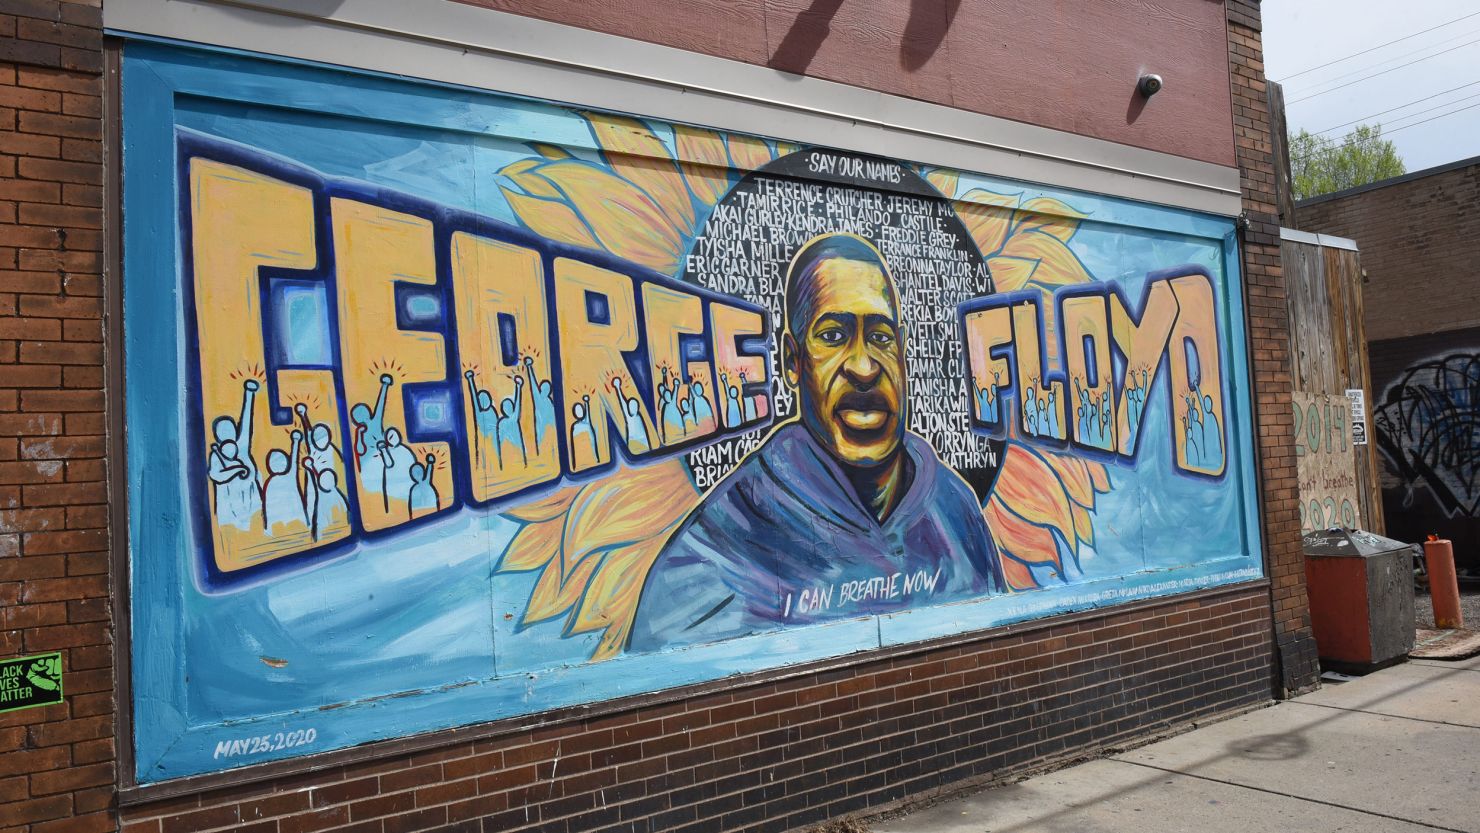 In May 2020, Floyd was murdered by Minneapolis Police Officer Derek Chauvin right outside this convenience store and sparked nationwide protest over police brutality.